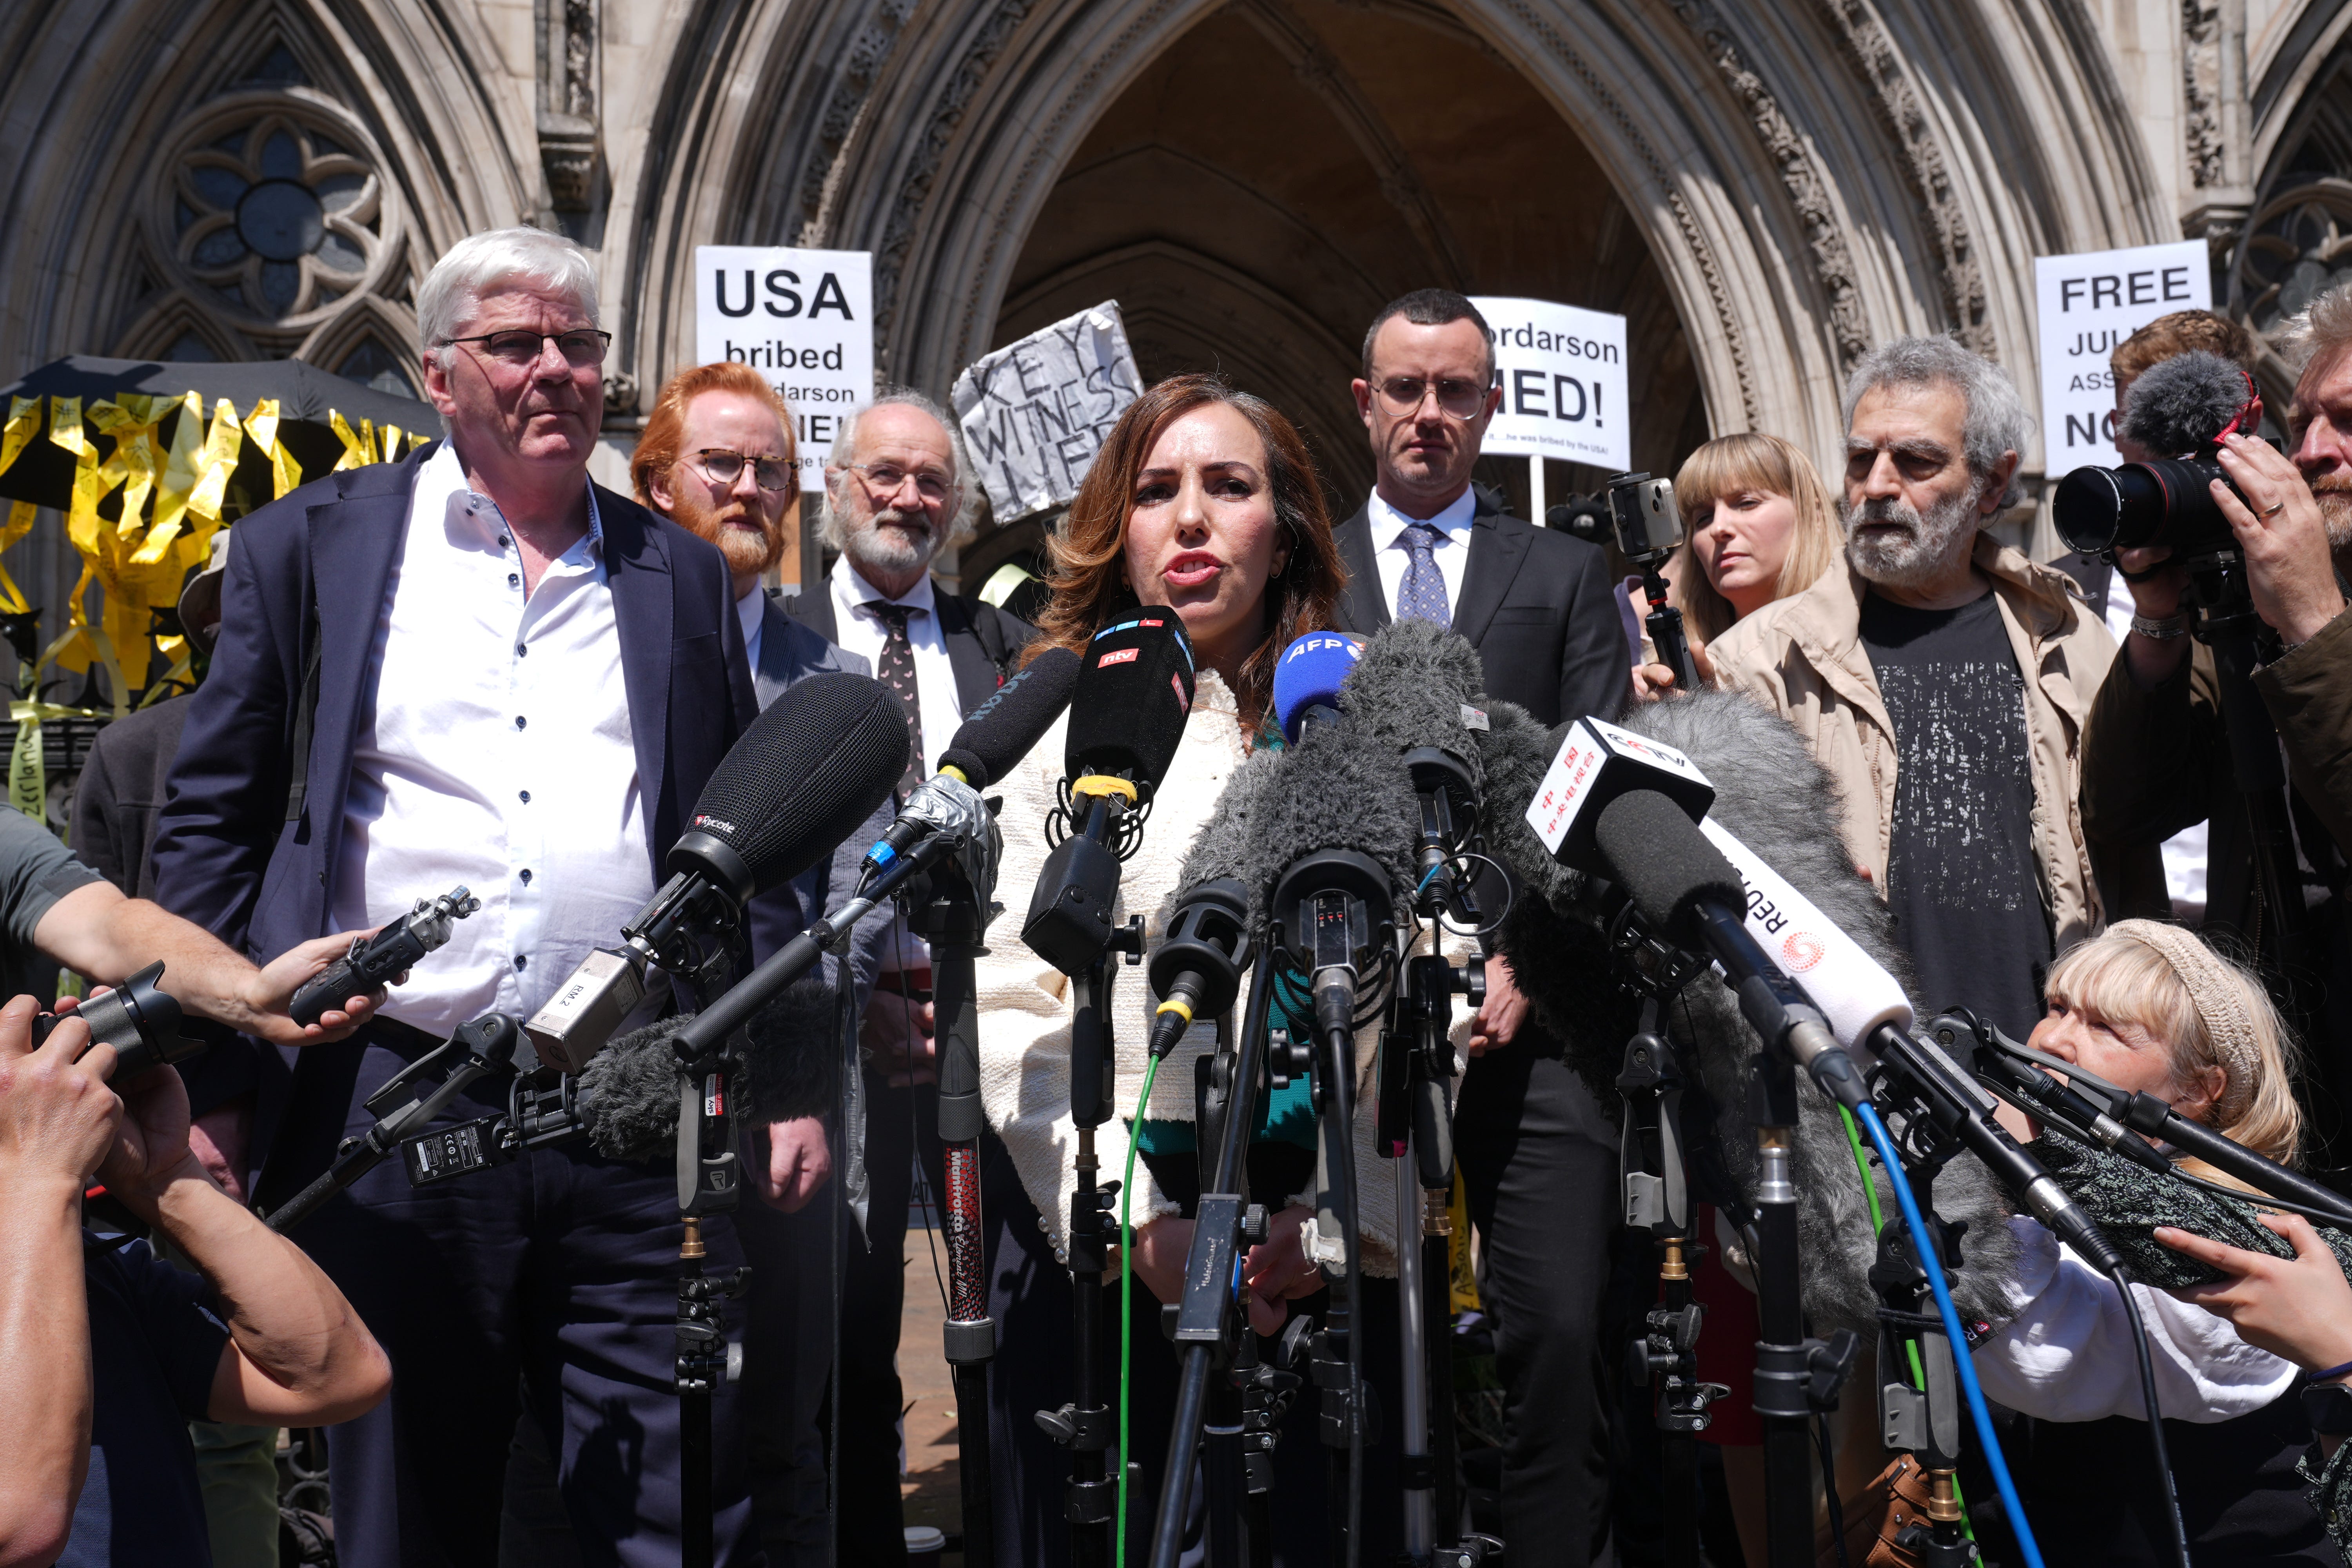 Stella Assange, Julian Assange's wife, makes a statement outside the Royal Courts of Justice in London, after she won a bid at the High Court to appeal against his extradition to the US